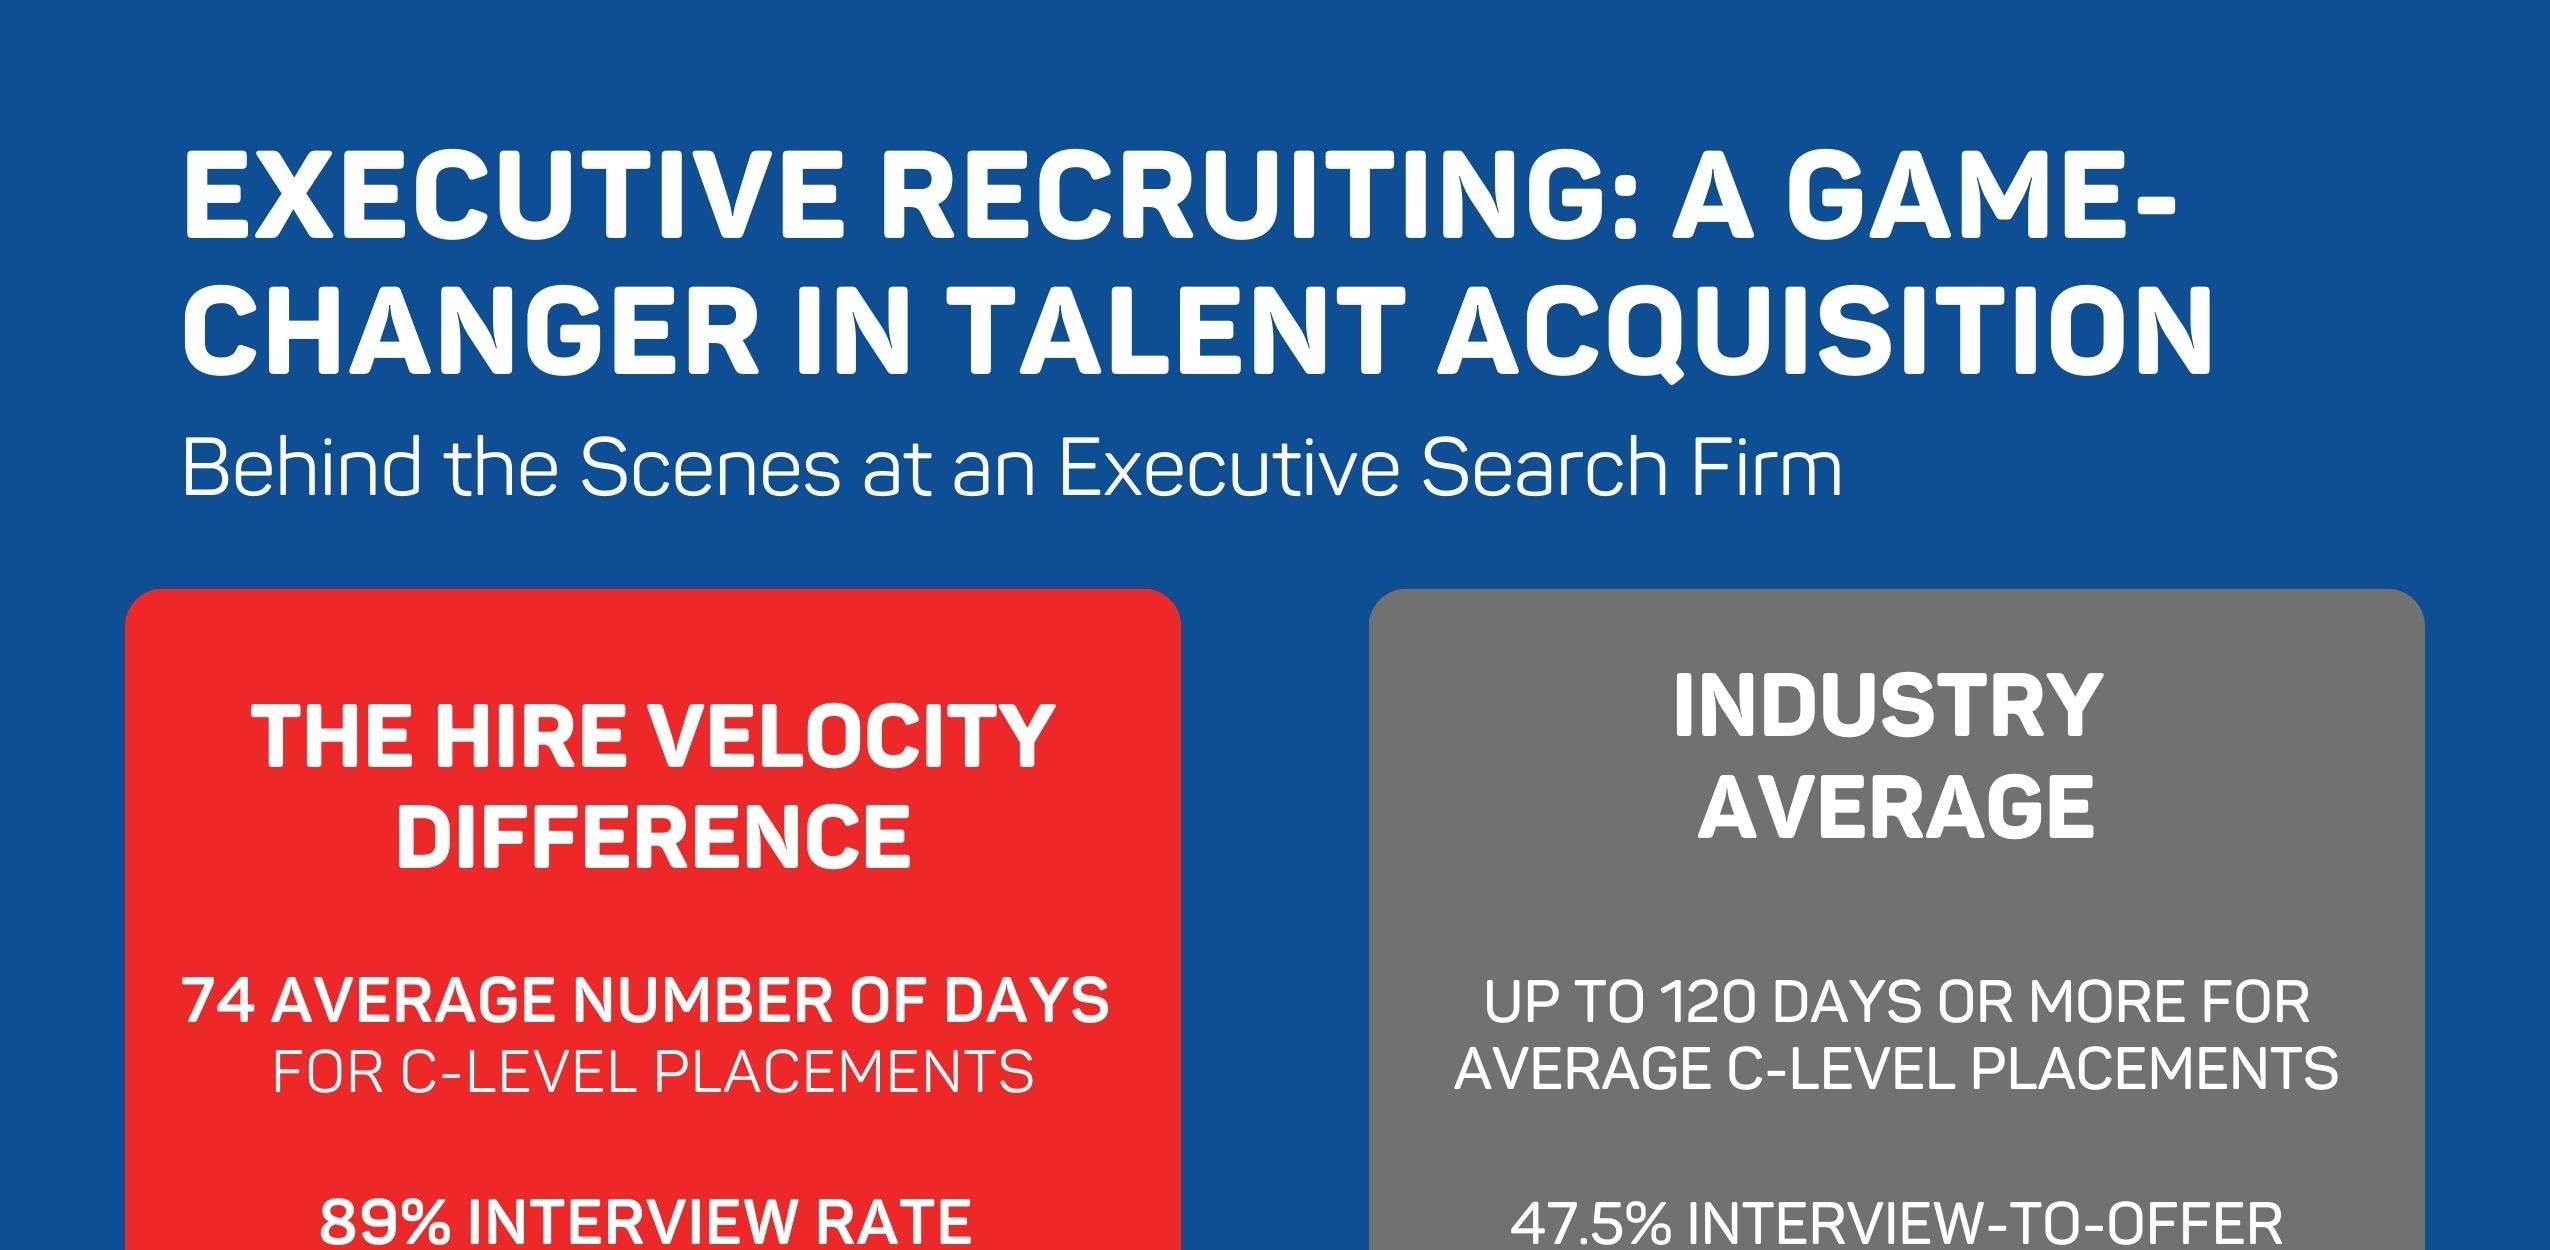 Executive Recruiting A Game-Changer in Talent Acquisition_Infographic Overview